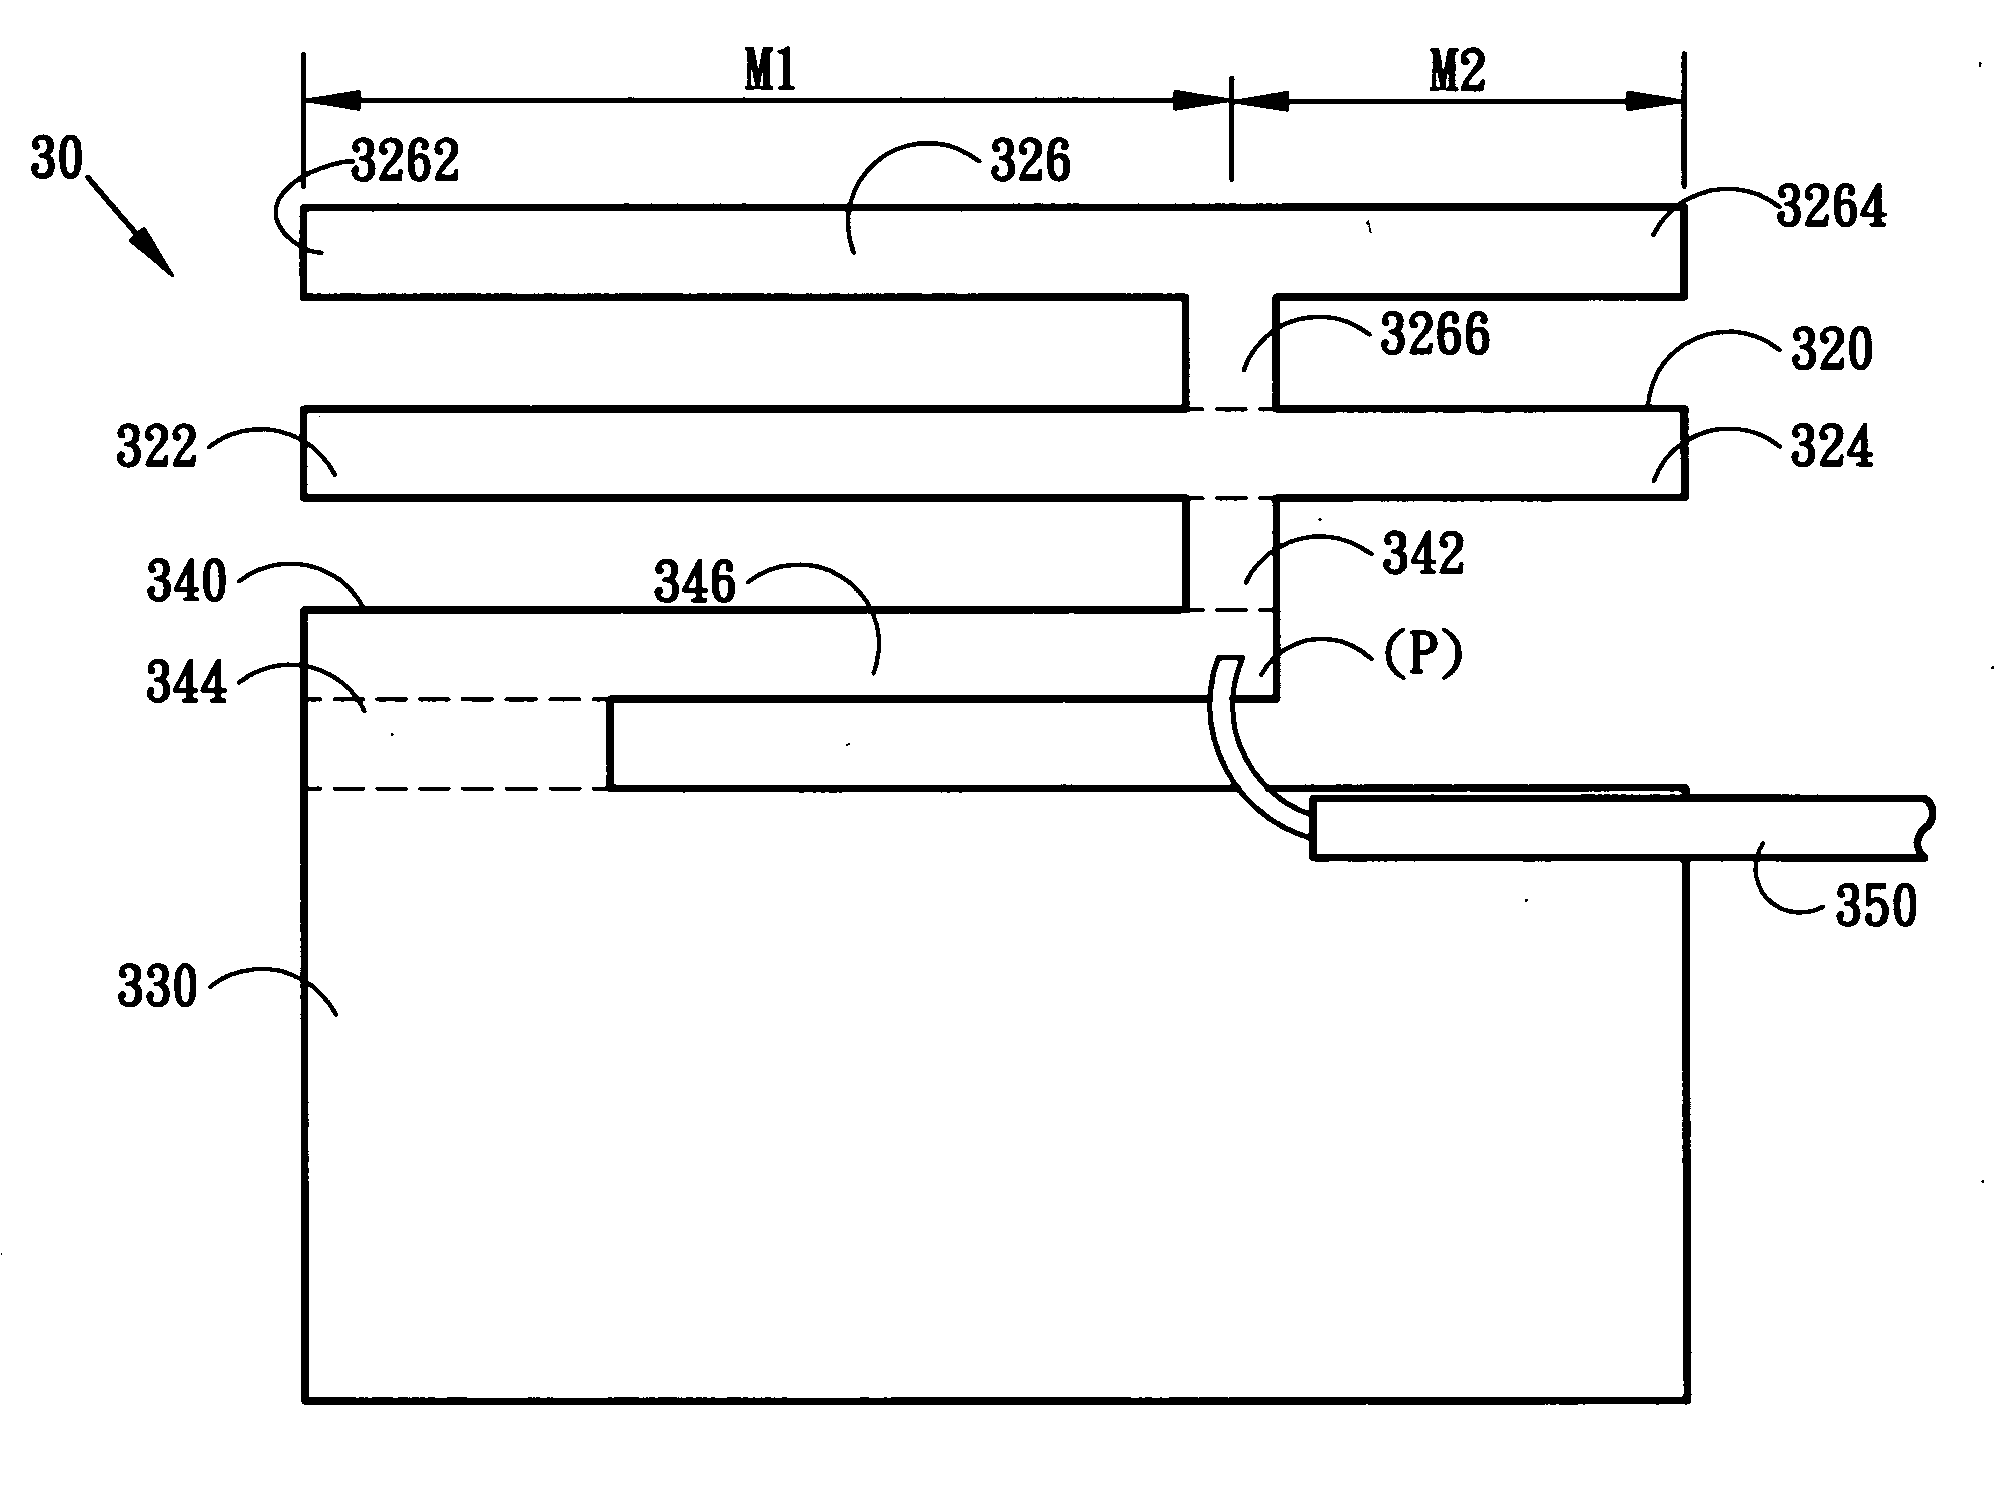 Multifrequency H-shaped antenna